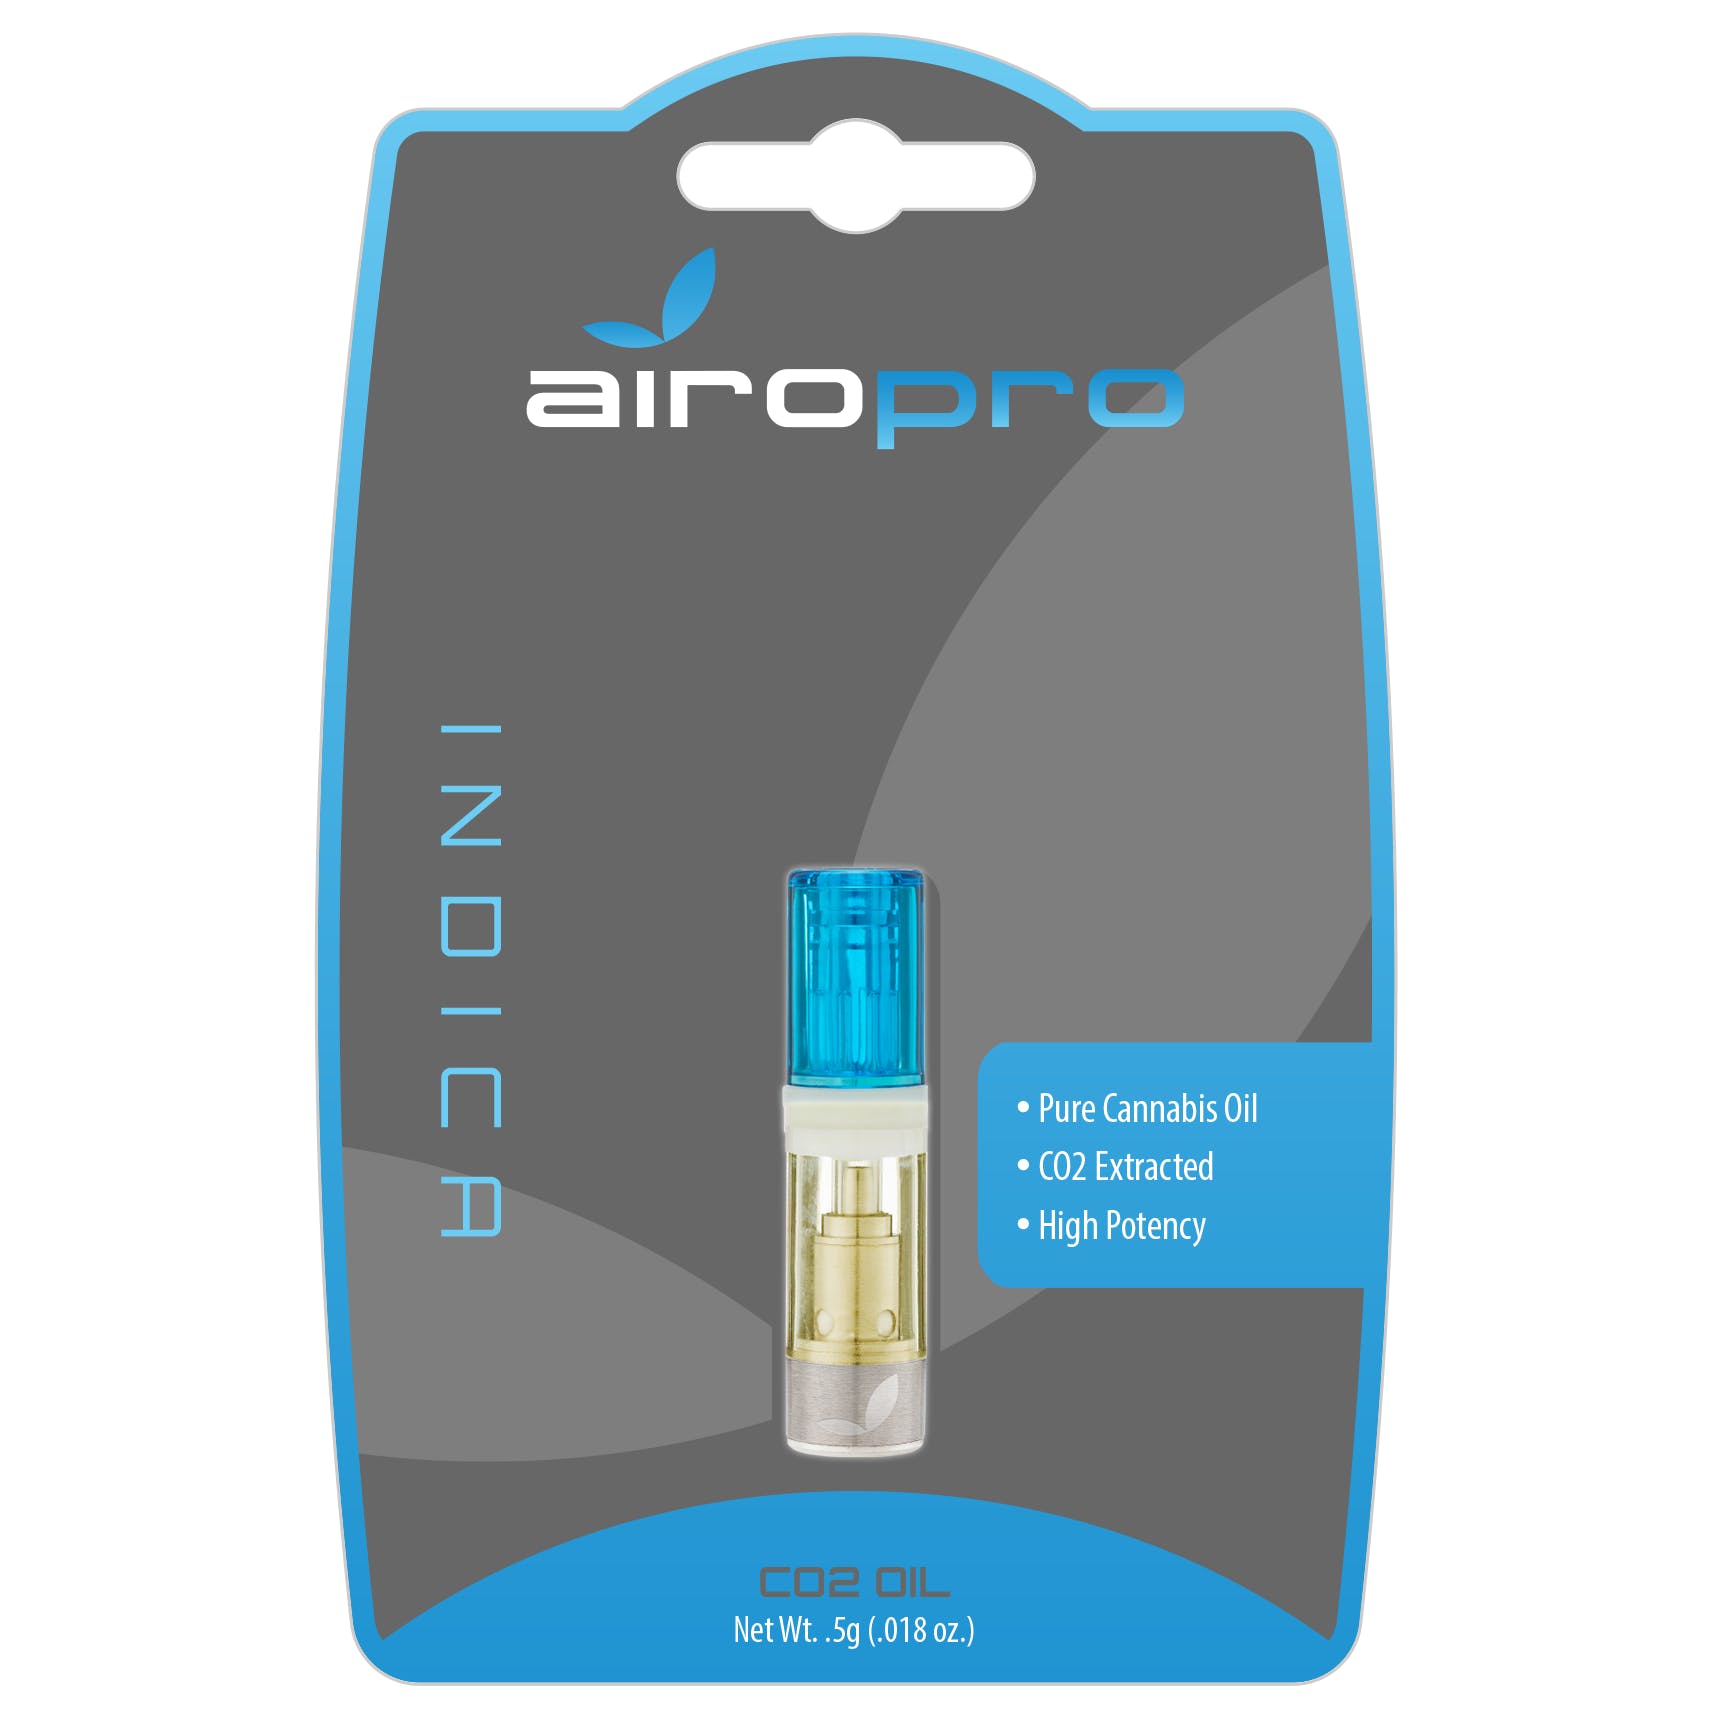 AiroPro - CO2 - Indica - .5g